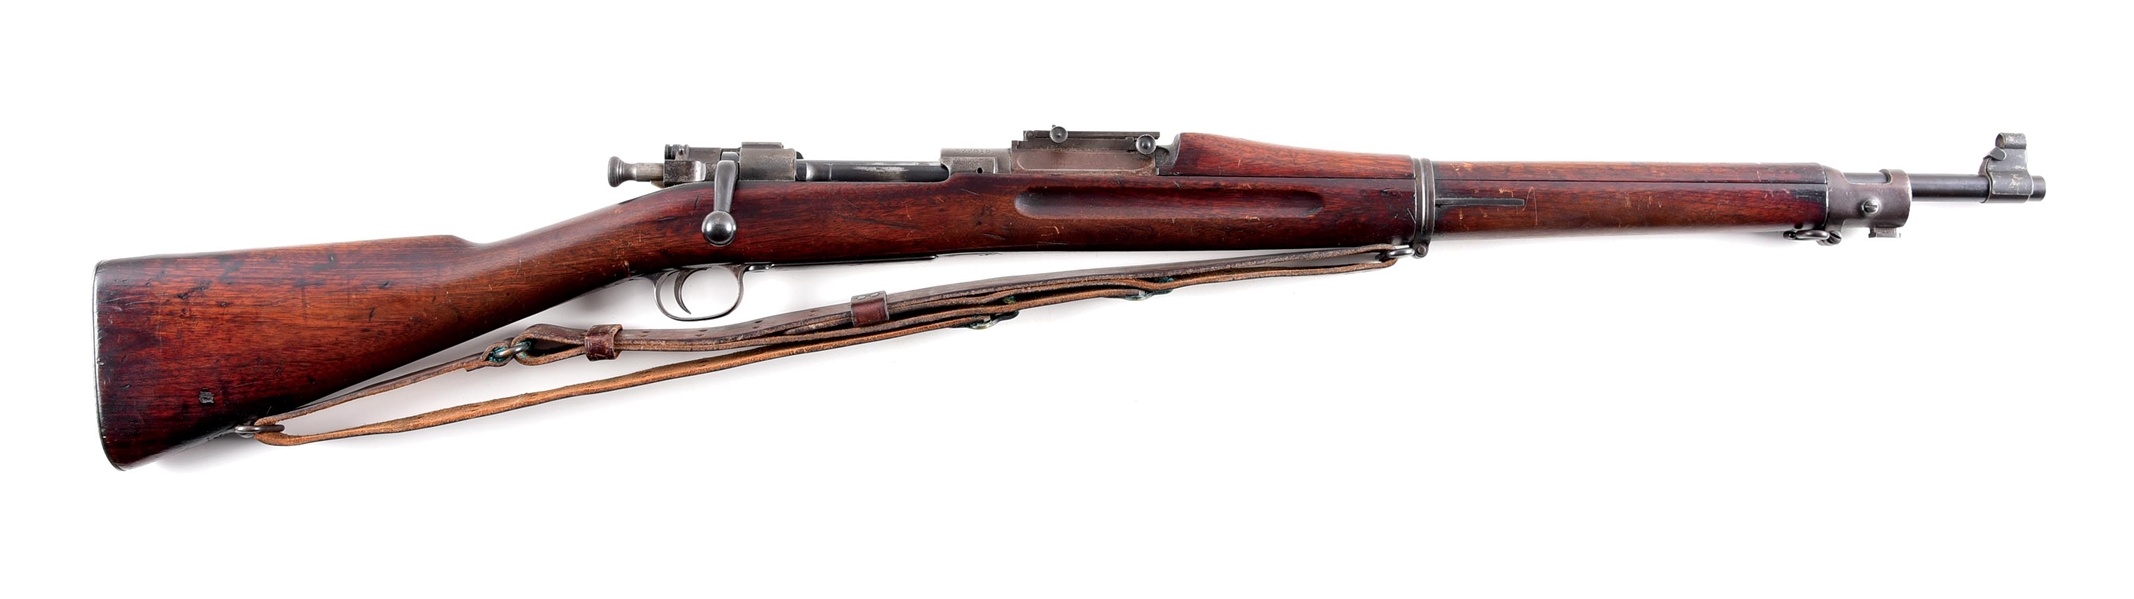 (C) SPRINGFIELD ARMORY MODEL 1903 BOLT ACTION RIFLE.